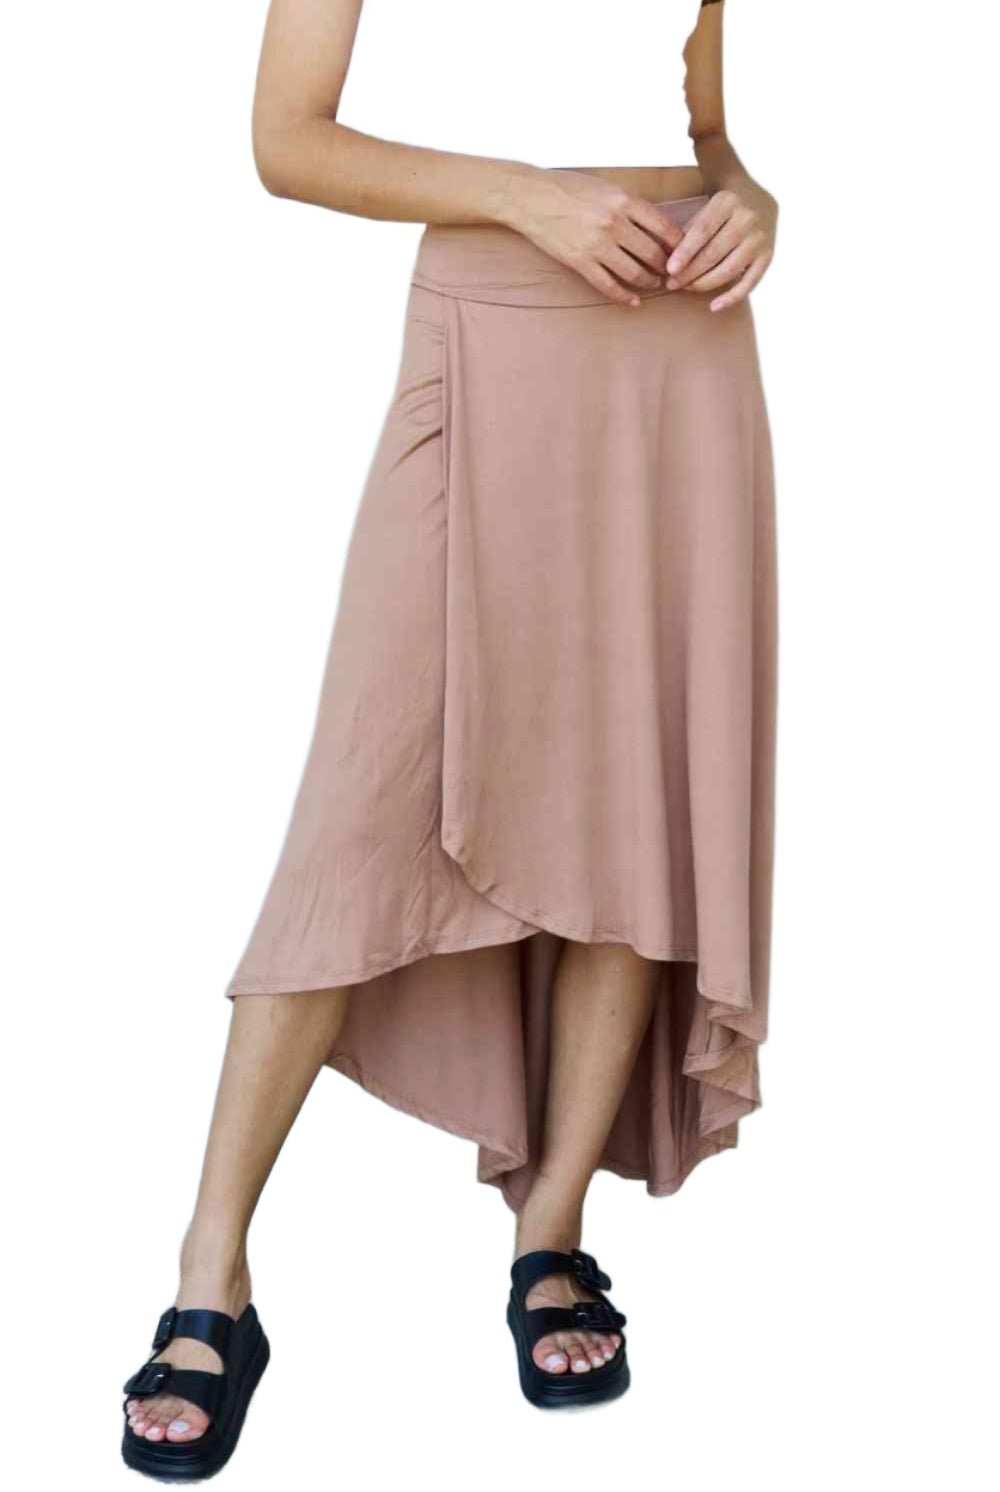 Women's Skirts Ninexis First Choice High Waisted Flare Maxi Skirt in Camel